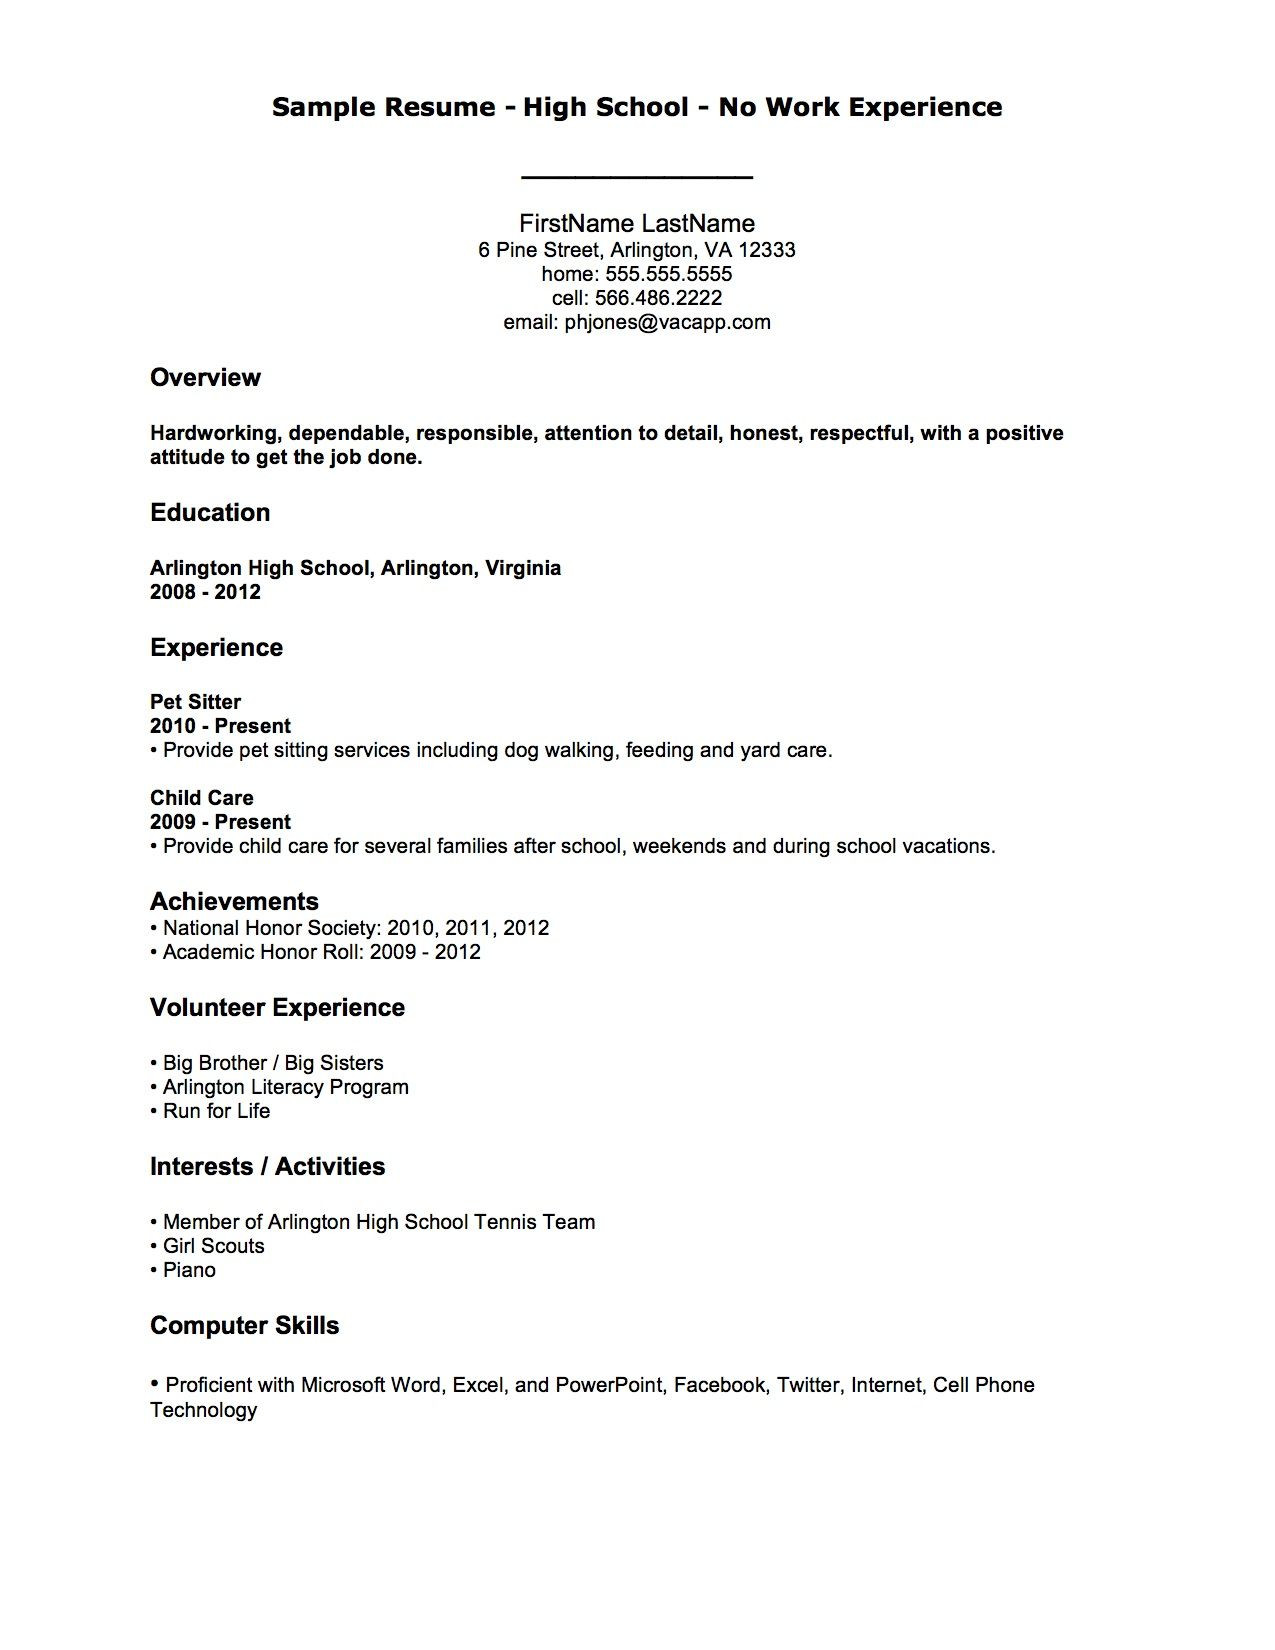 Resume Template for someone with No Work Experience Resume Examples with No Job Experience , #examples #experience …